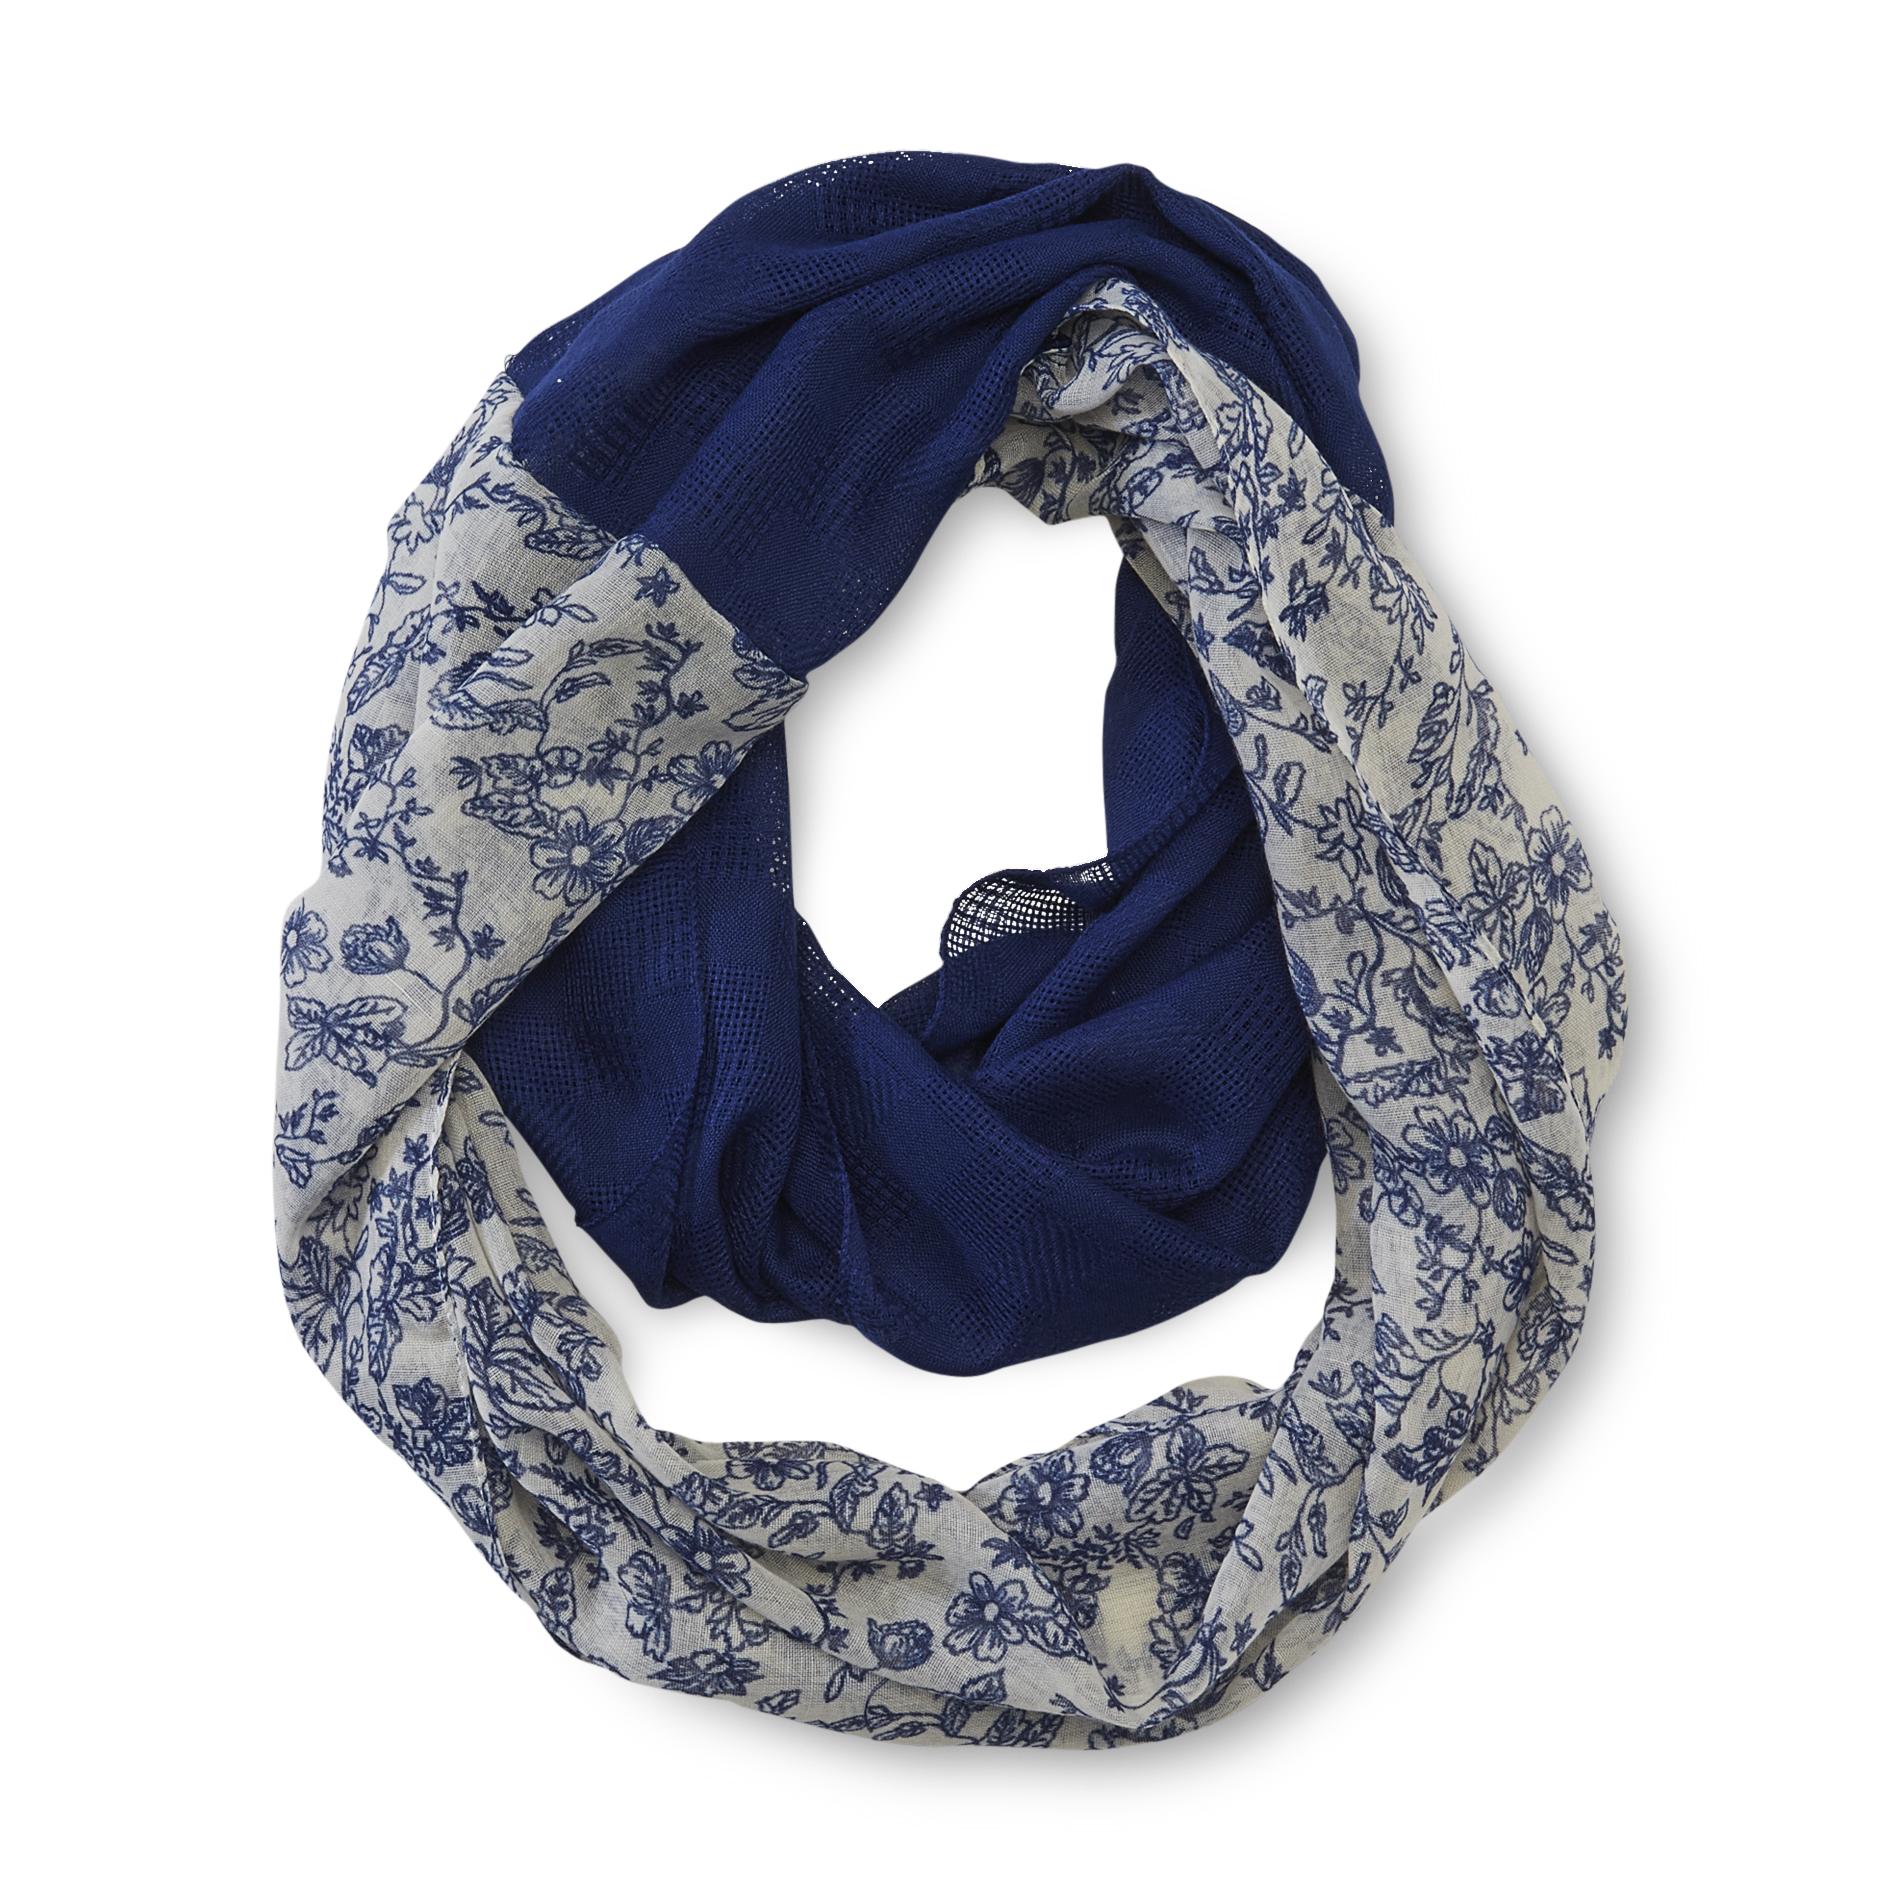 Junior's Infinity Scarf - Floral